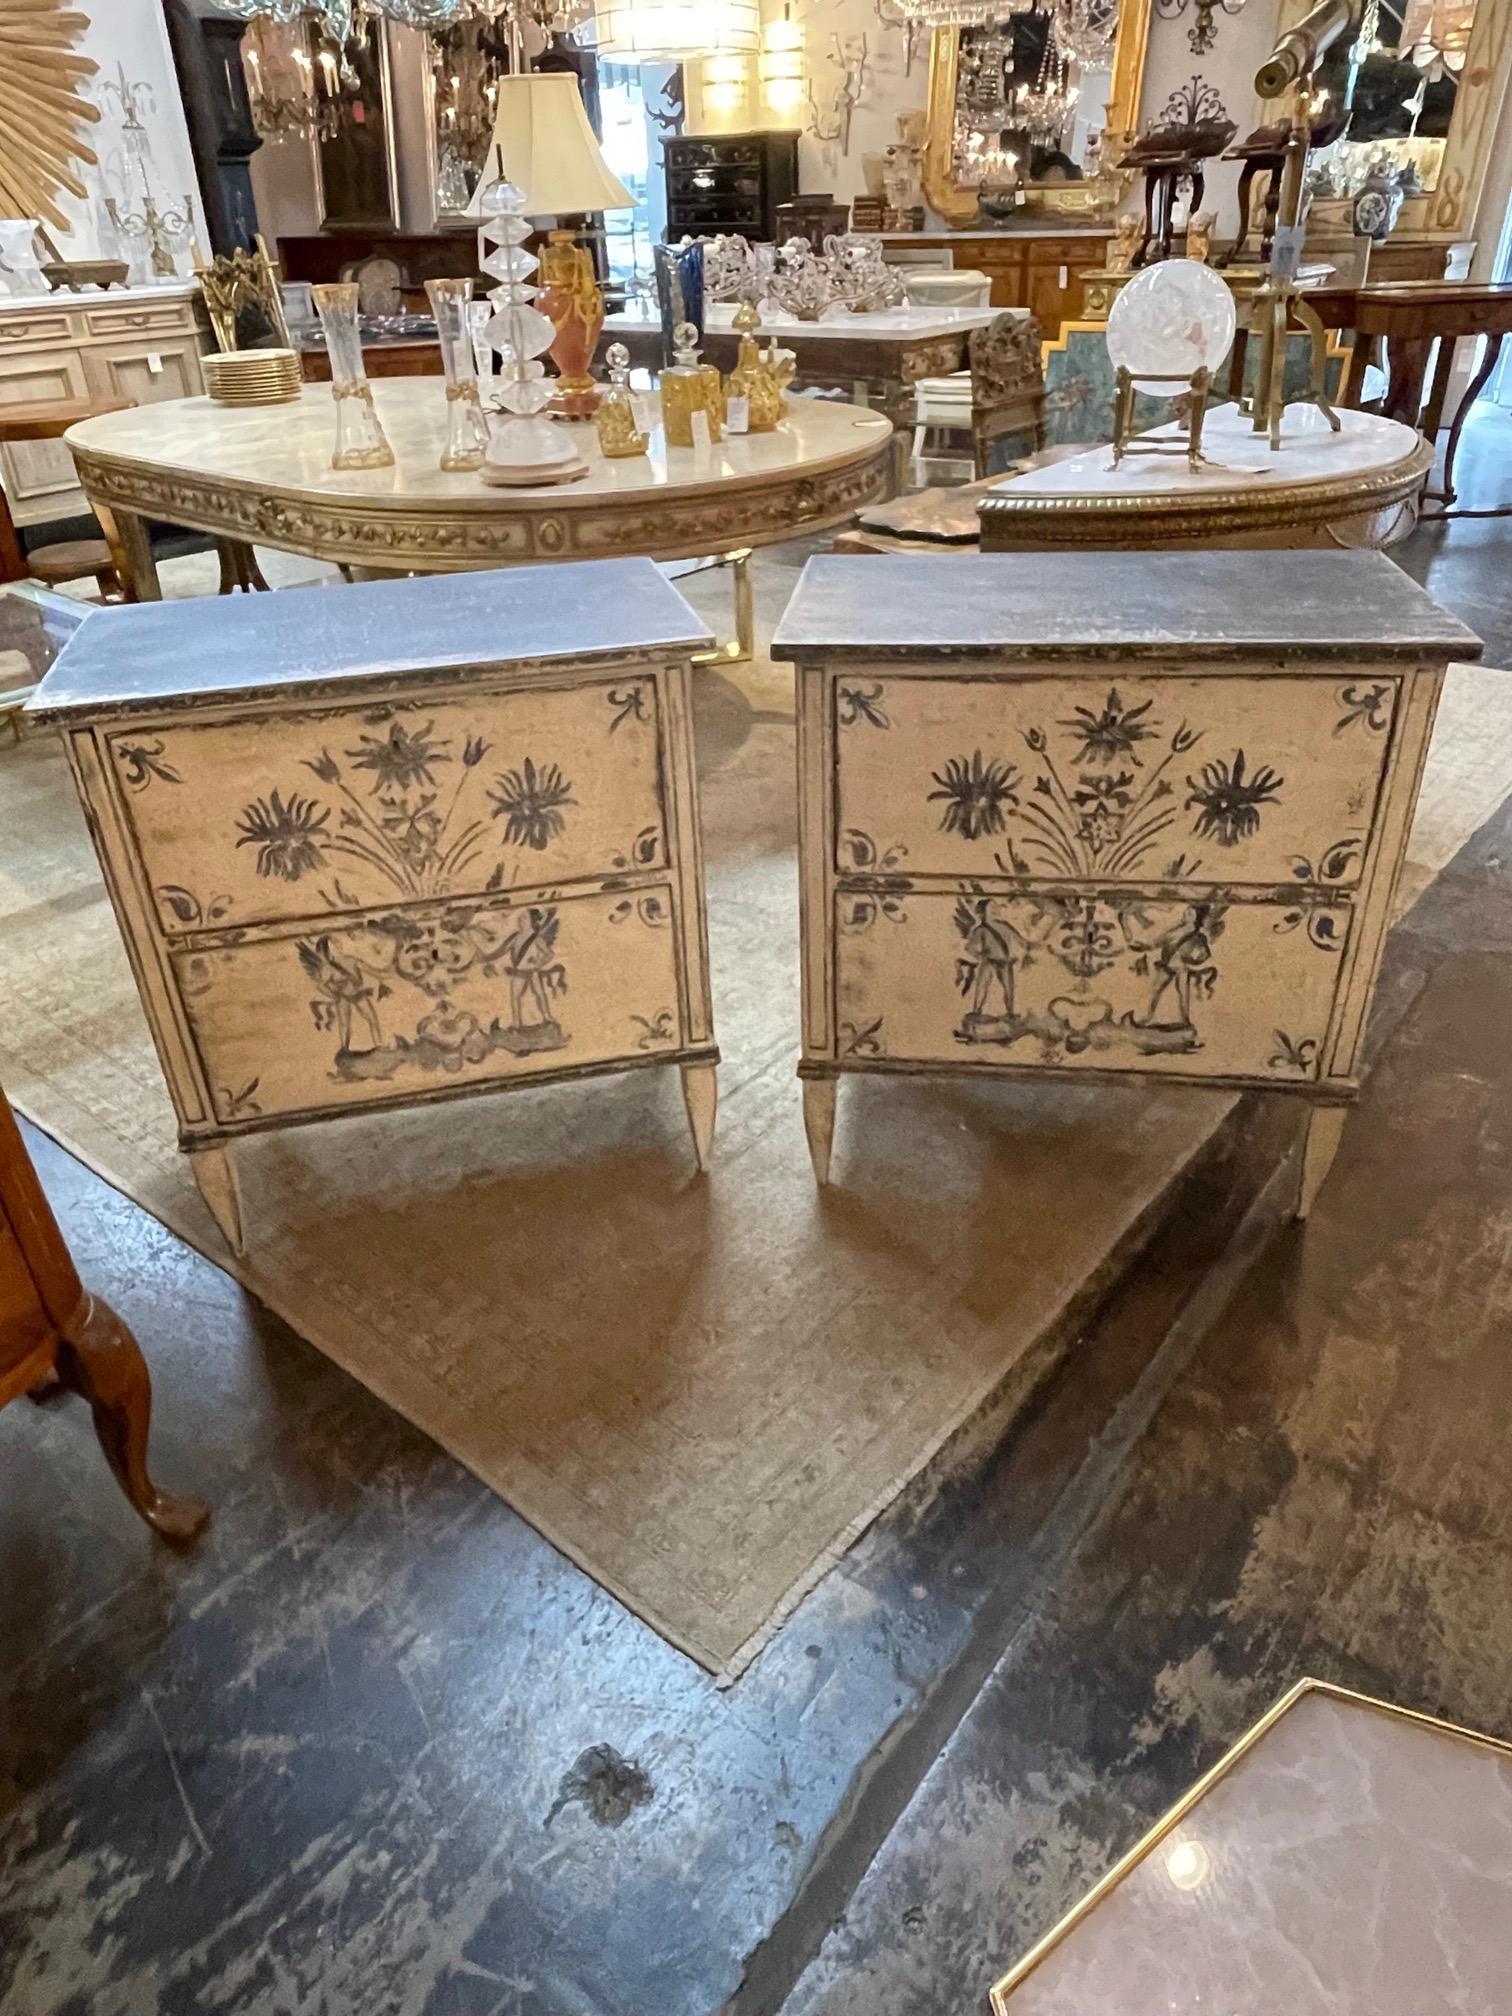 Lovely decorative pair of French Neo-Classical style hand painted bed side tables. Featuring interesting painted images including fleur- di- lis, flowers and angels in a dark blue. Beautiful patina as well. Fabulous!!